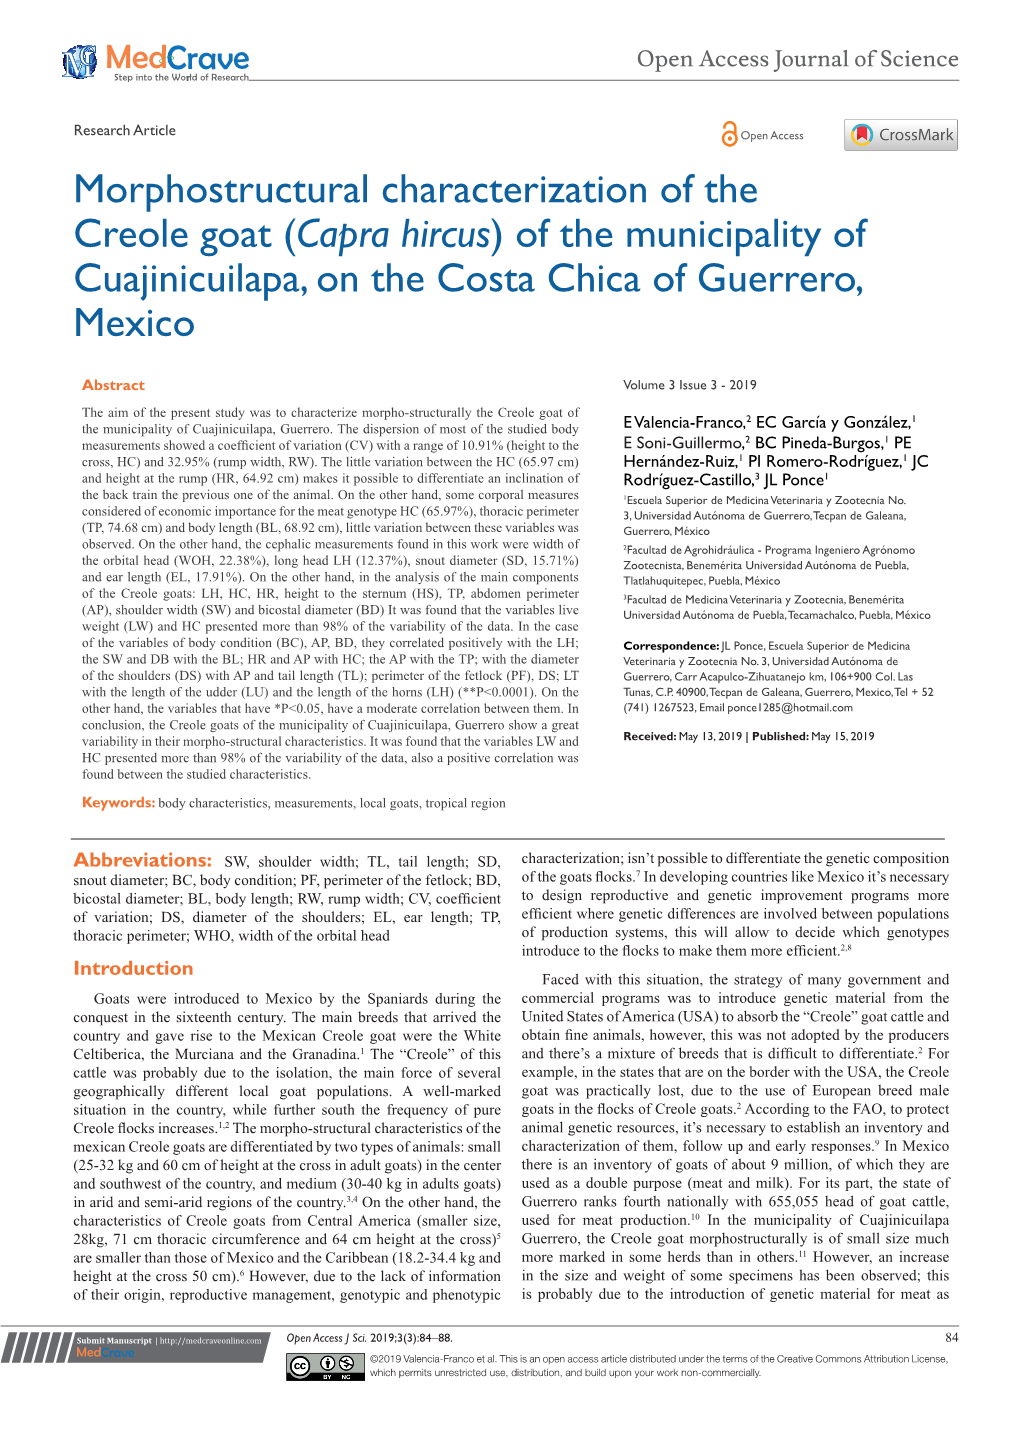 Morphostructural Characterization of the Creole Goat (Capra Hircus) of the Municipality of Cuajinicuilapa, on the Costa Chica of Guerrero, Mexico